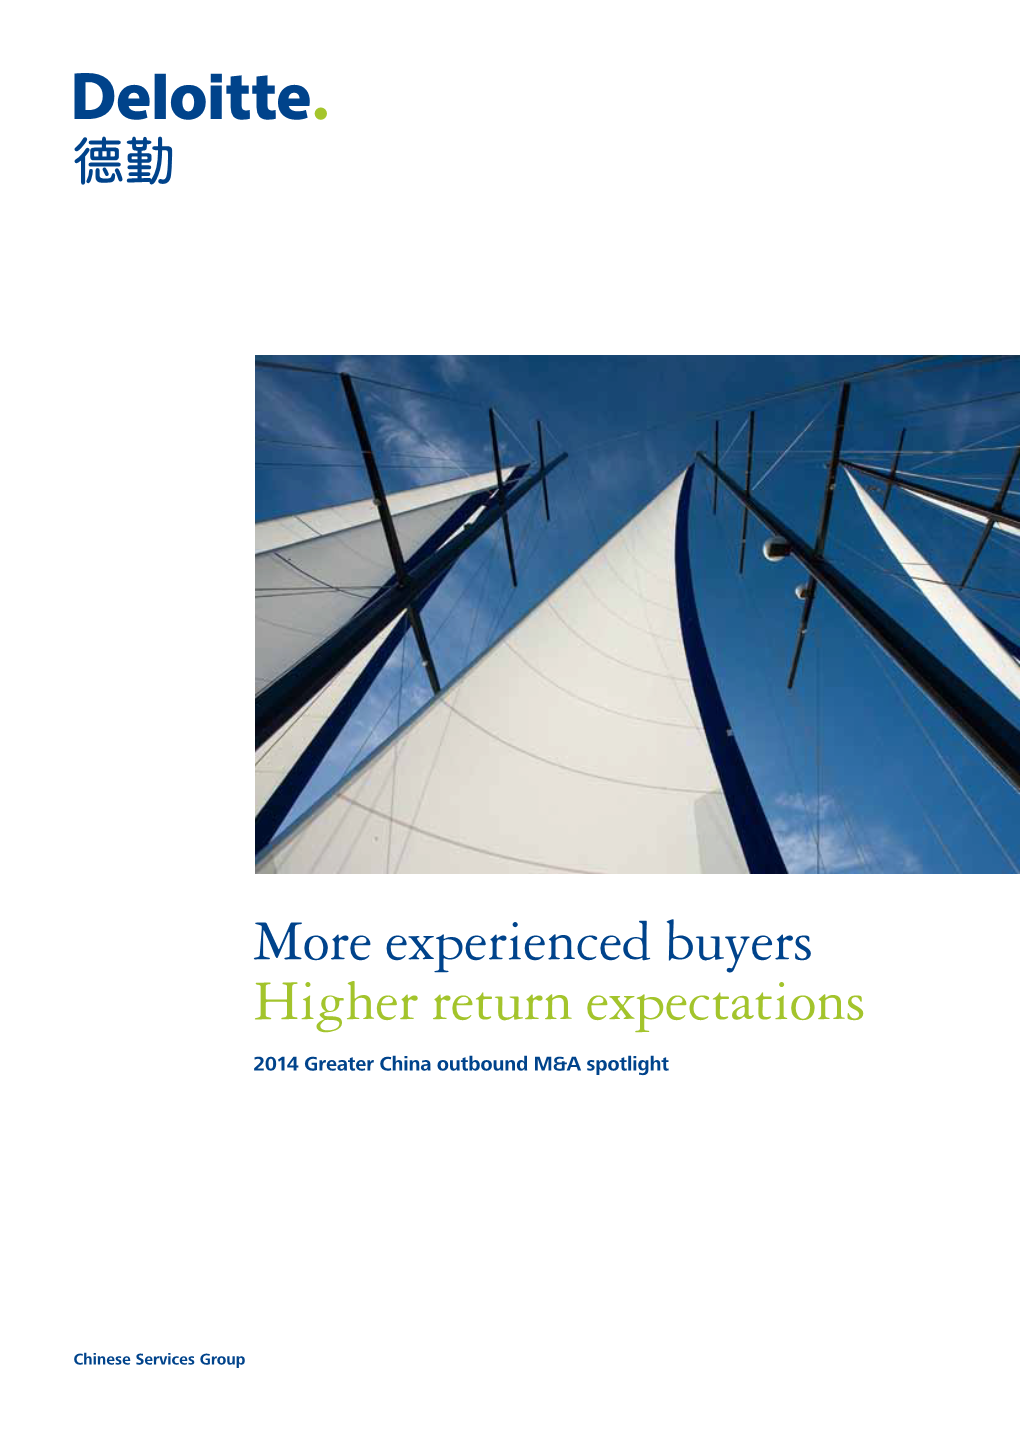 More Experienced Buyers Higher Return Expectations